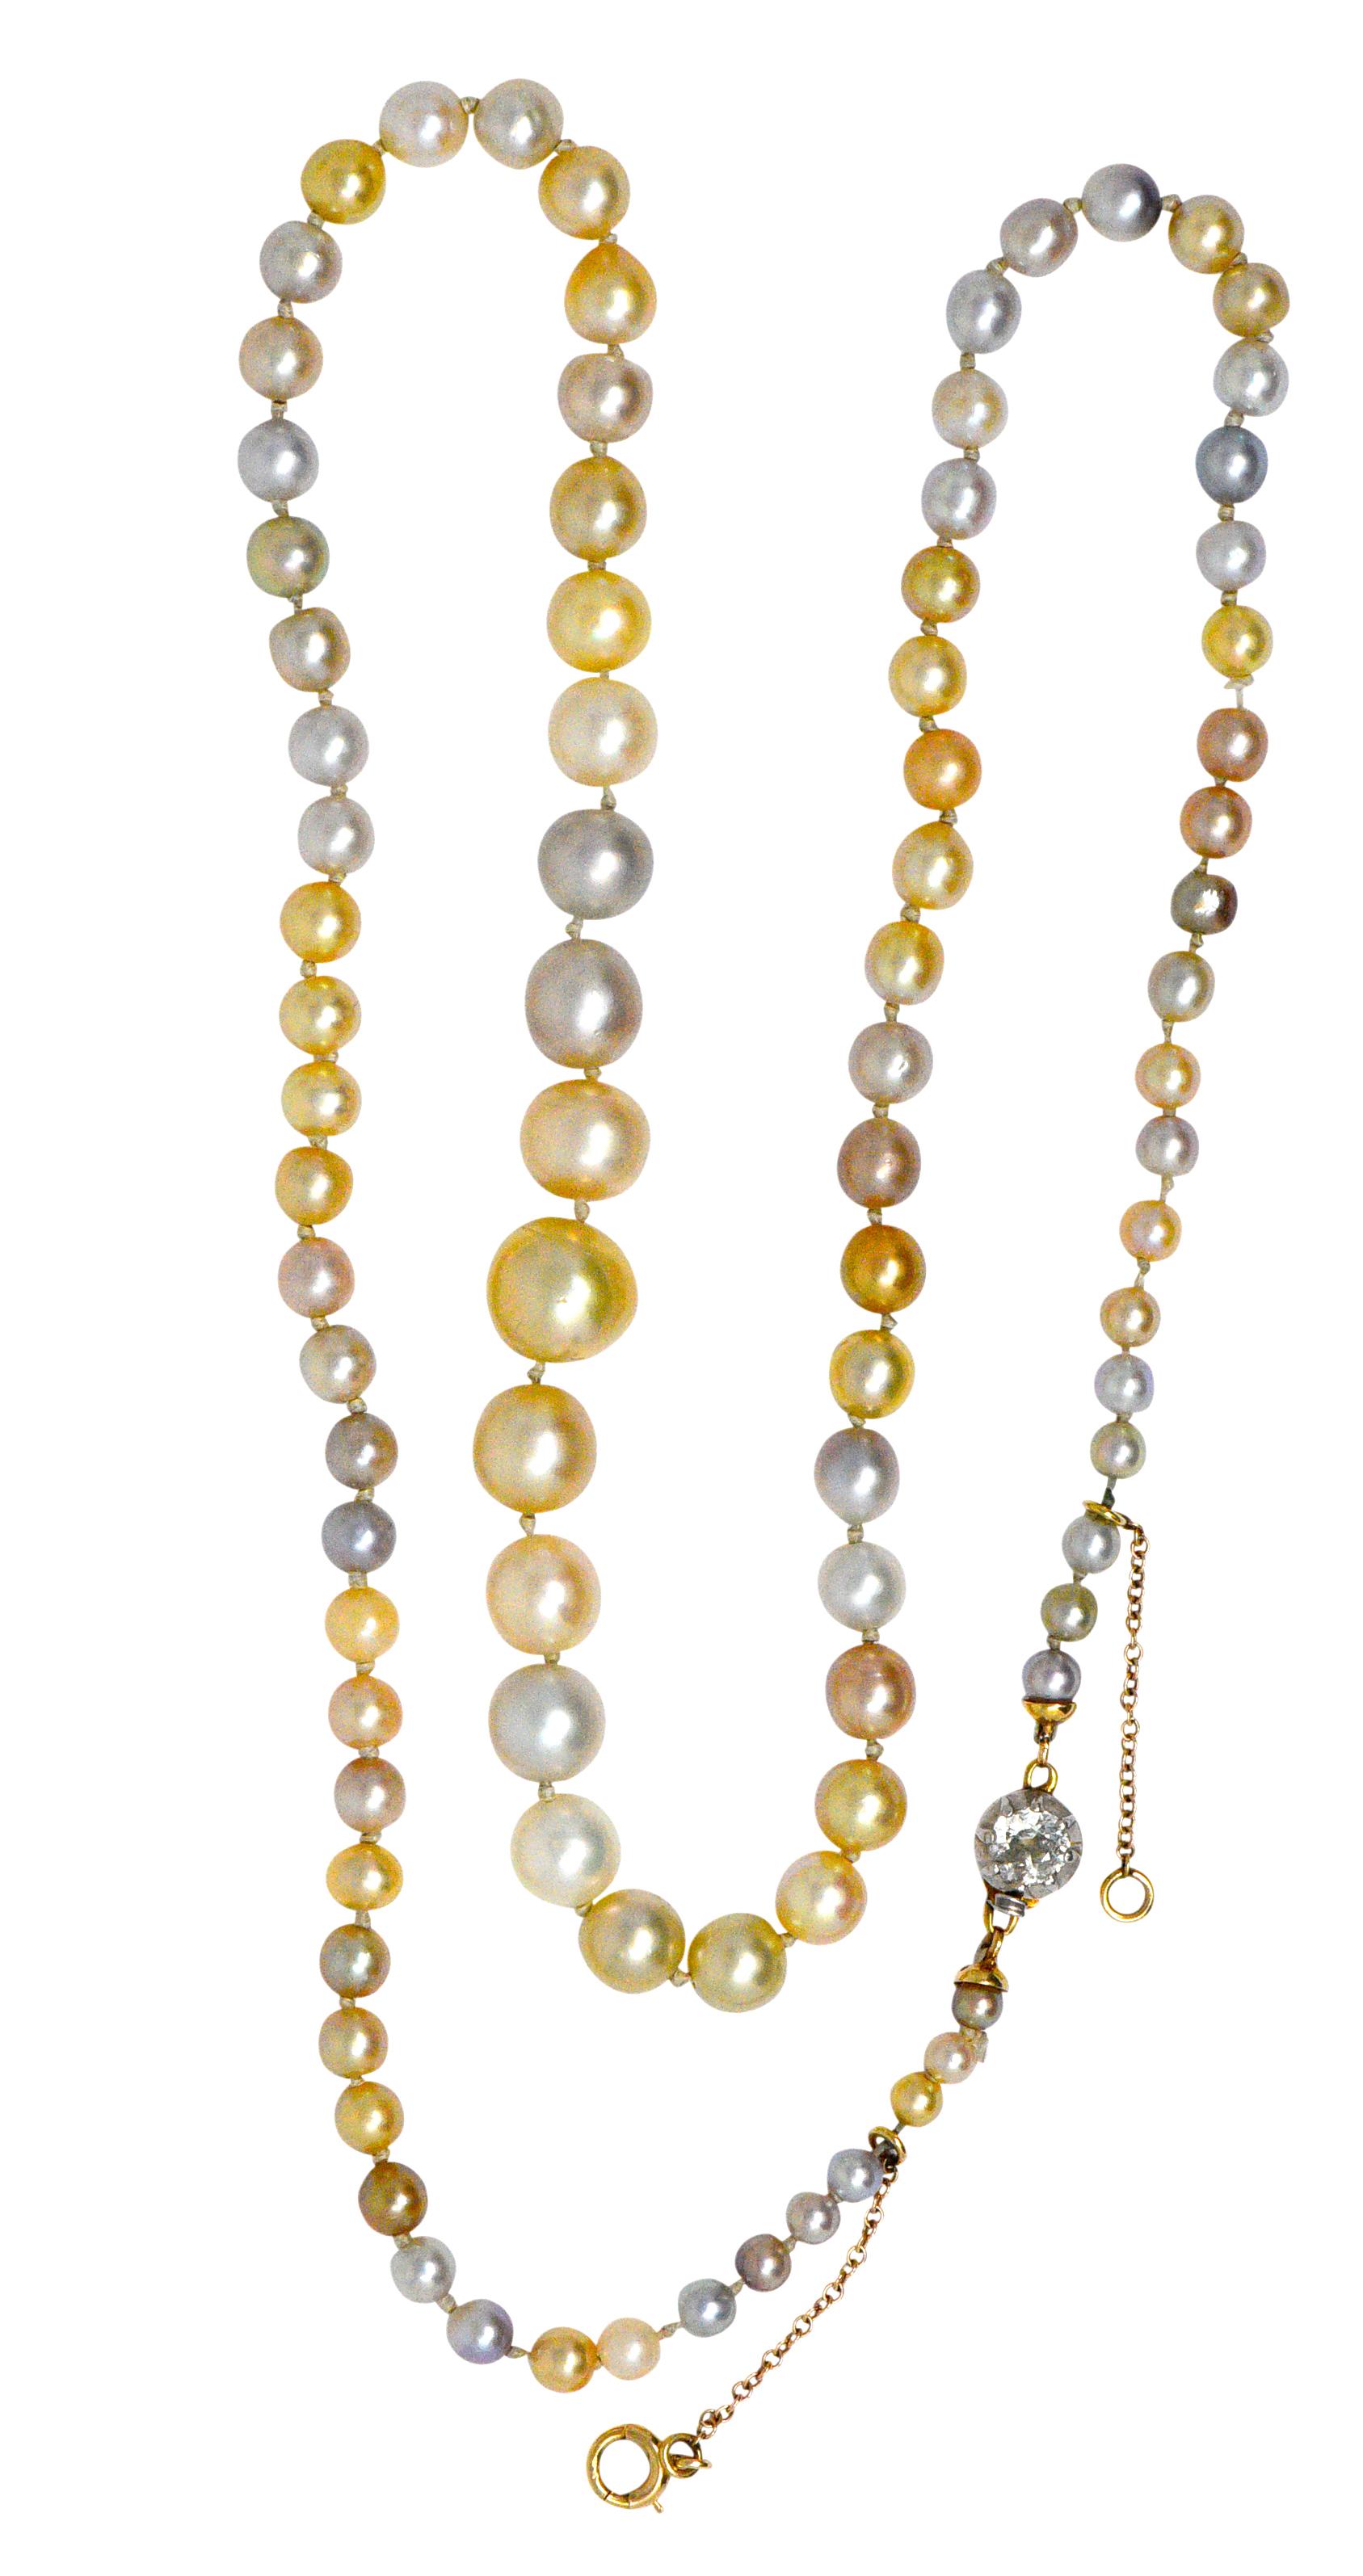 With 91 graduated natural pearls measuring 2.98 to 8.52 mm, variously colored, variously shaped some with orient

87 pearls tested to be saltwater formed, 4 freshwater formed and from the Unio mollusks 

Completed by a old European cut diamond,